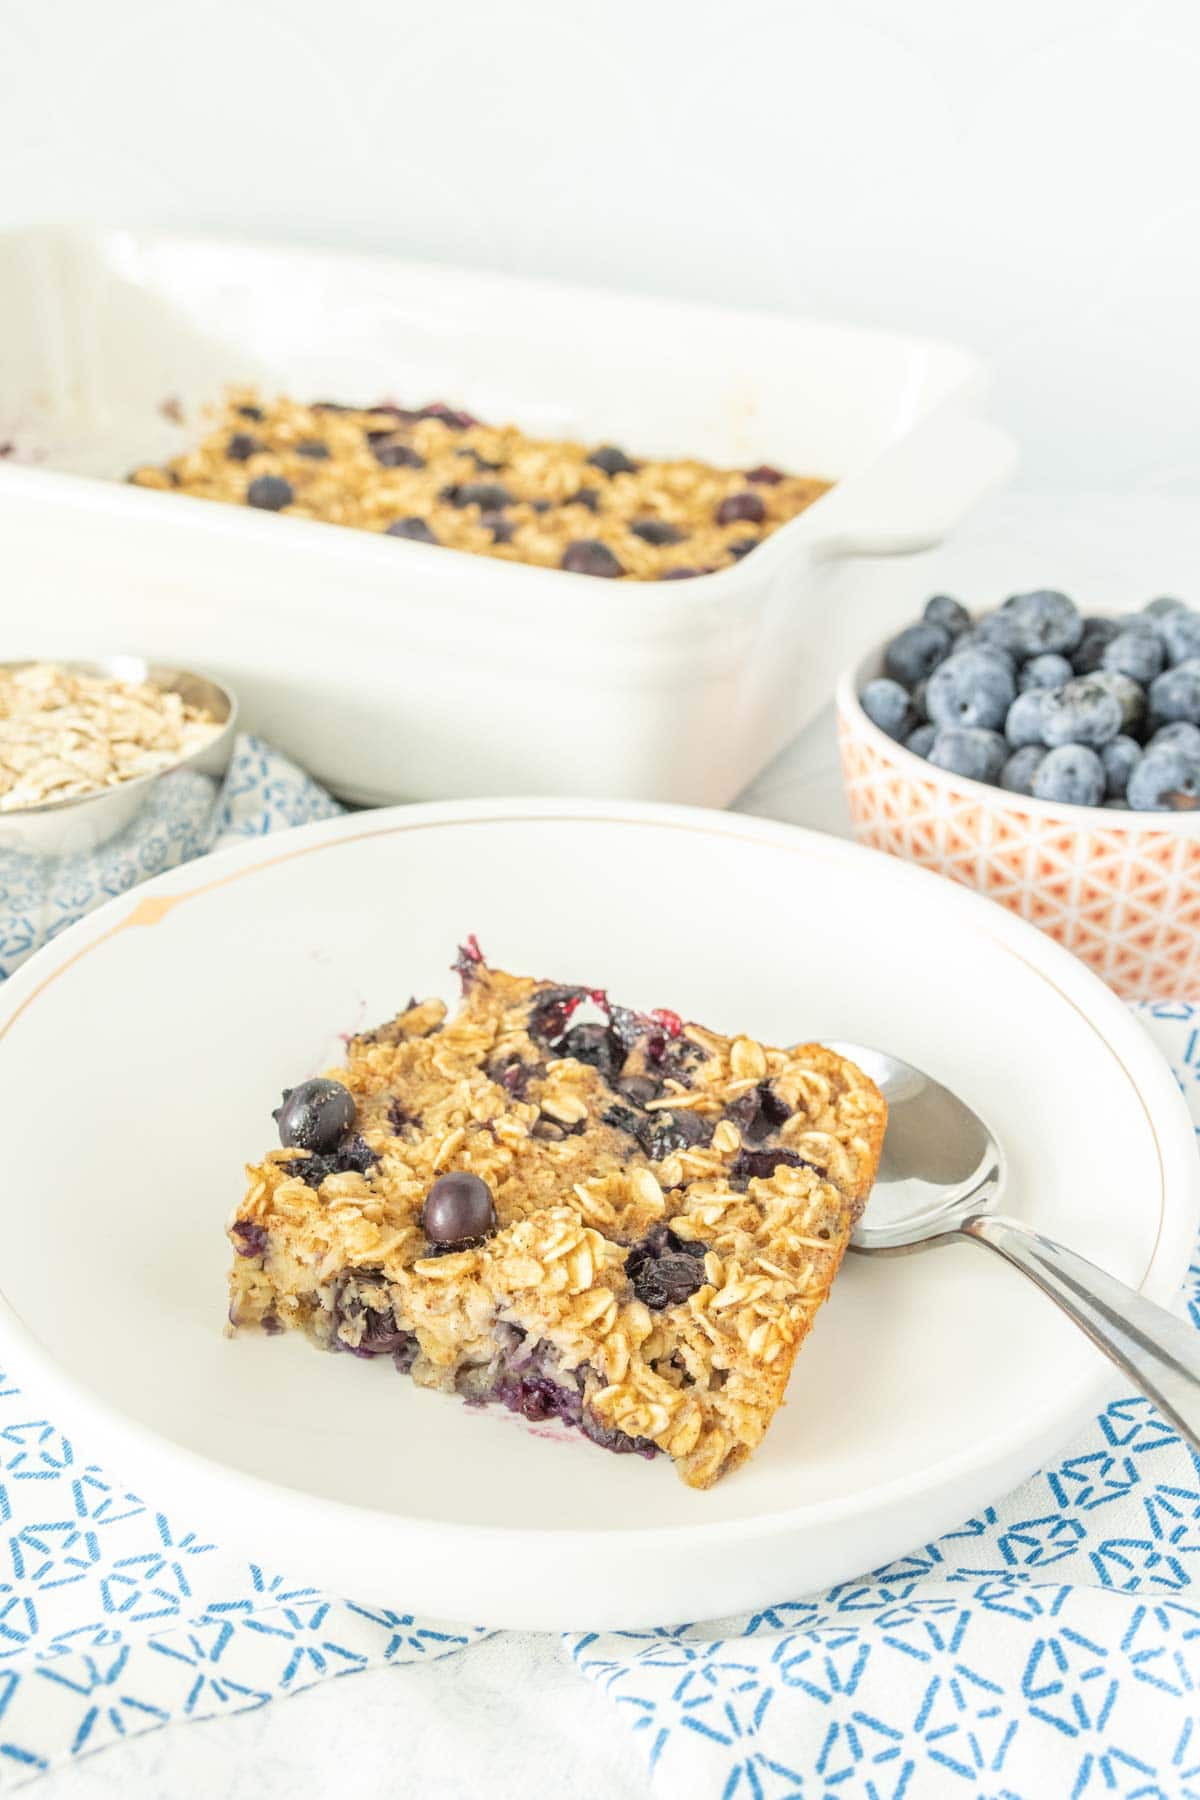 A plate of baked oatmeal with blueberries and oats.